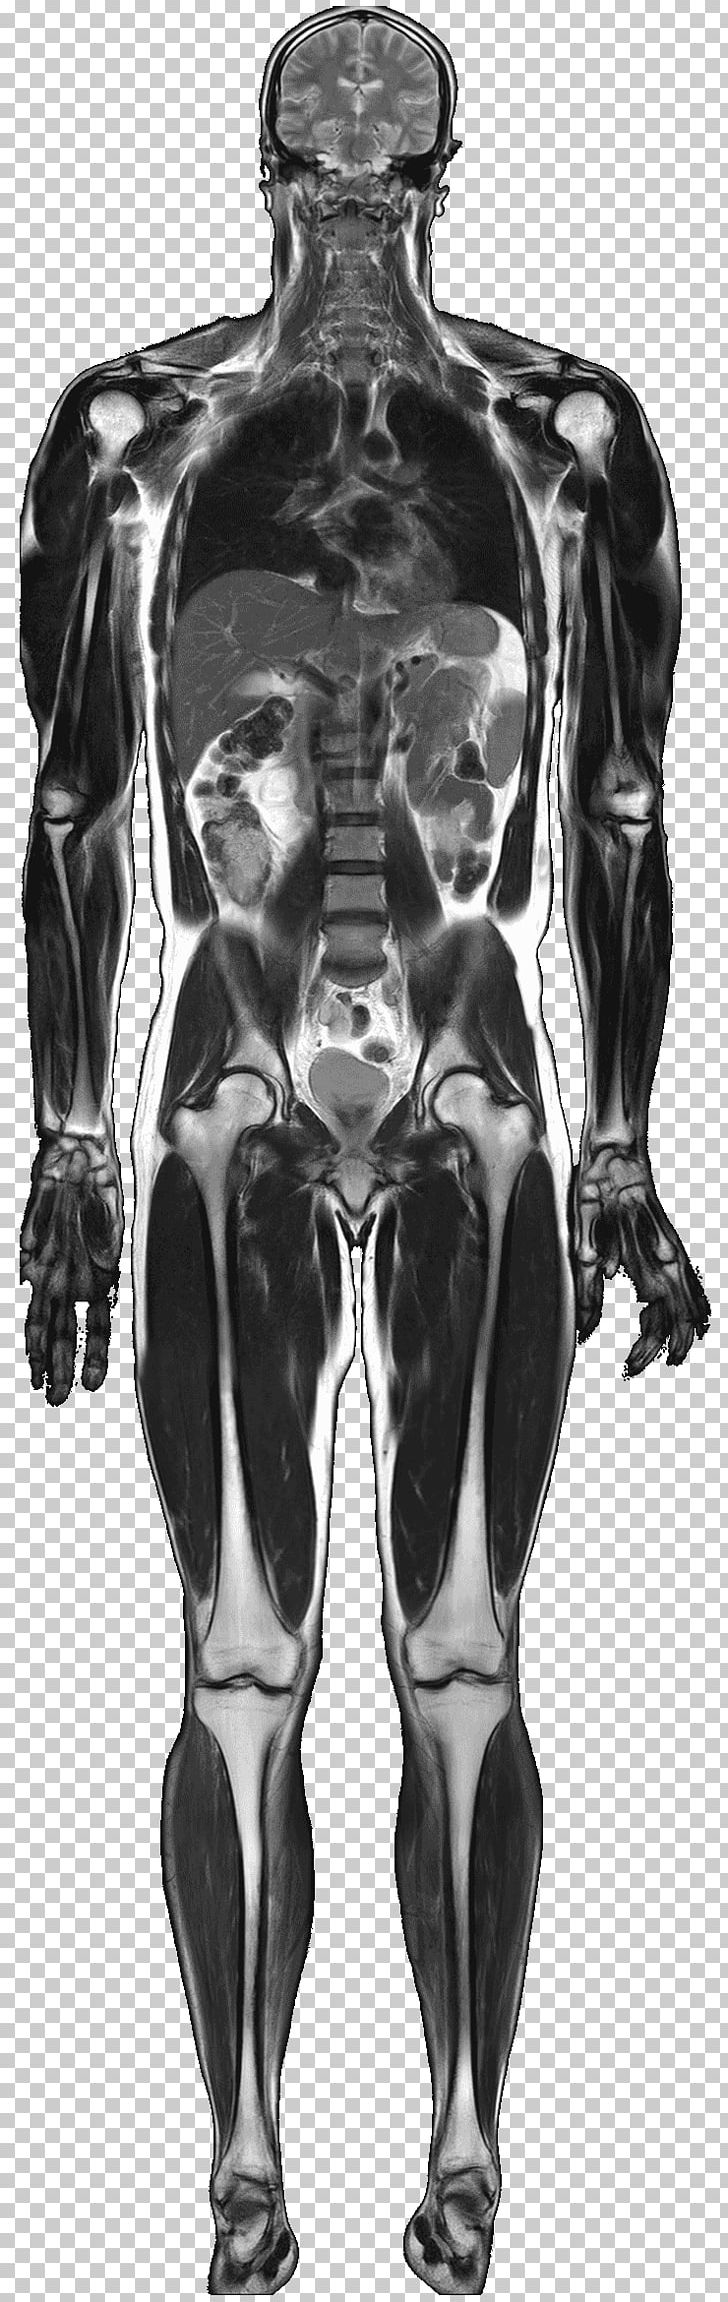 Magnetic Resonance Imaging Medical Imaging Anatomy Human Body Nuclear Magnetic Resonance PNG, Clipart, Anatomy, Arm, Black And White, Chest, Figure Drawing Free PNG Download